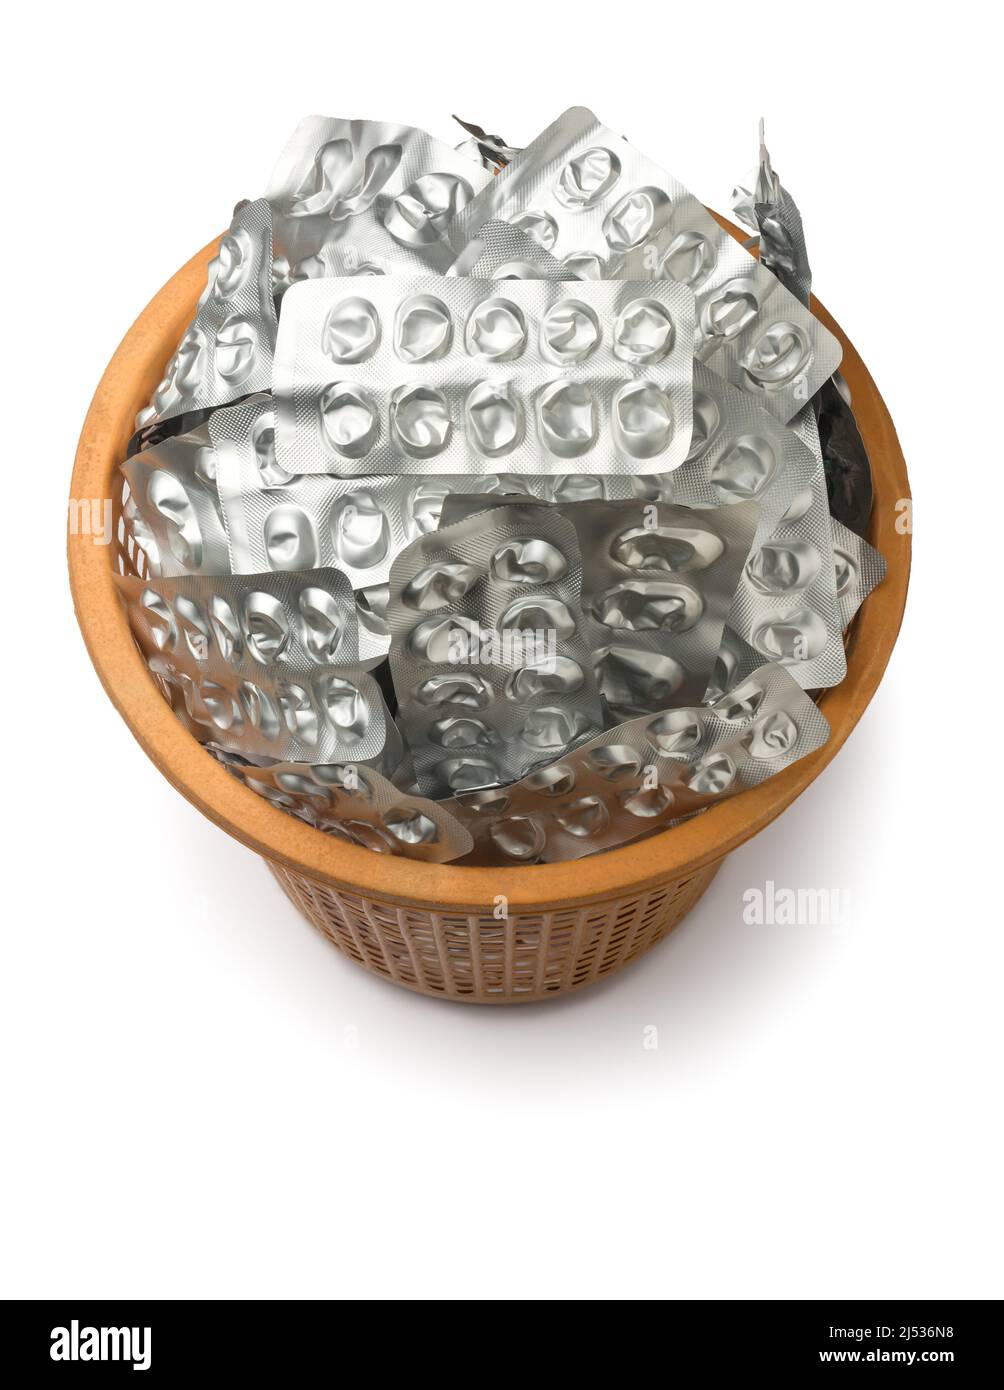 dustbin full of used empty pill blister packs, silver medicine packets in a plastic container, treatment and medication concept, taken from above Stock Photo